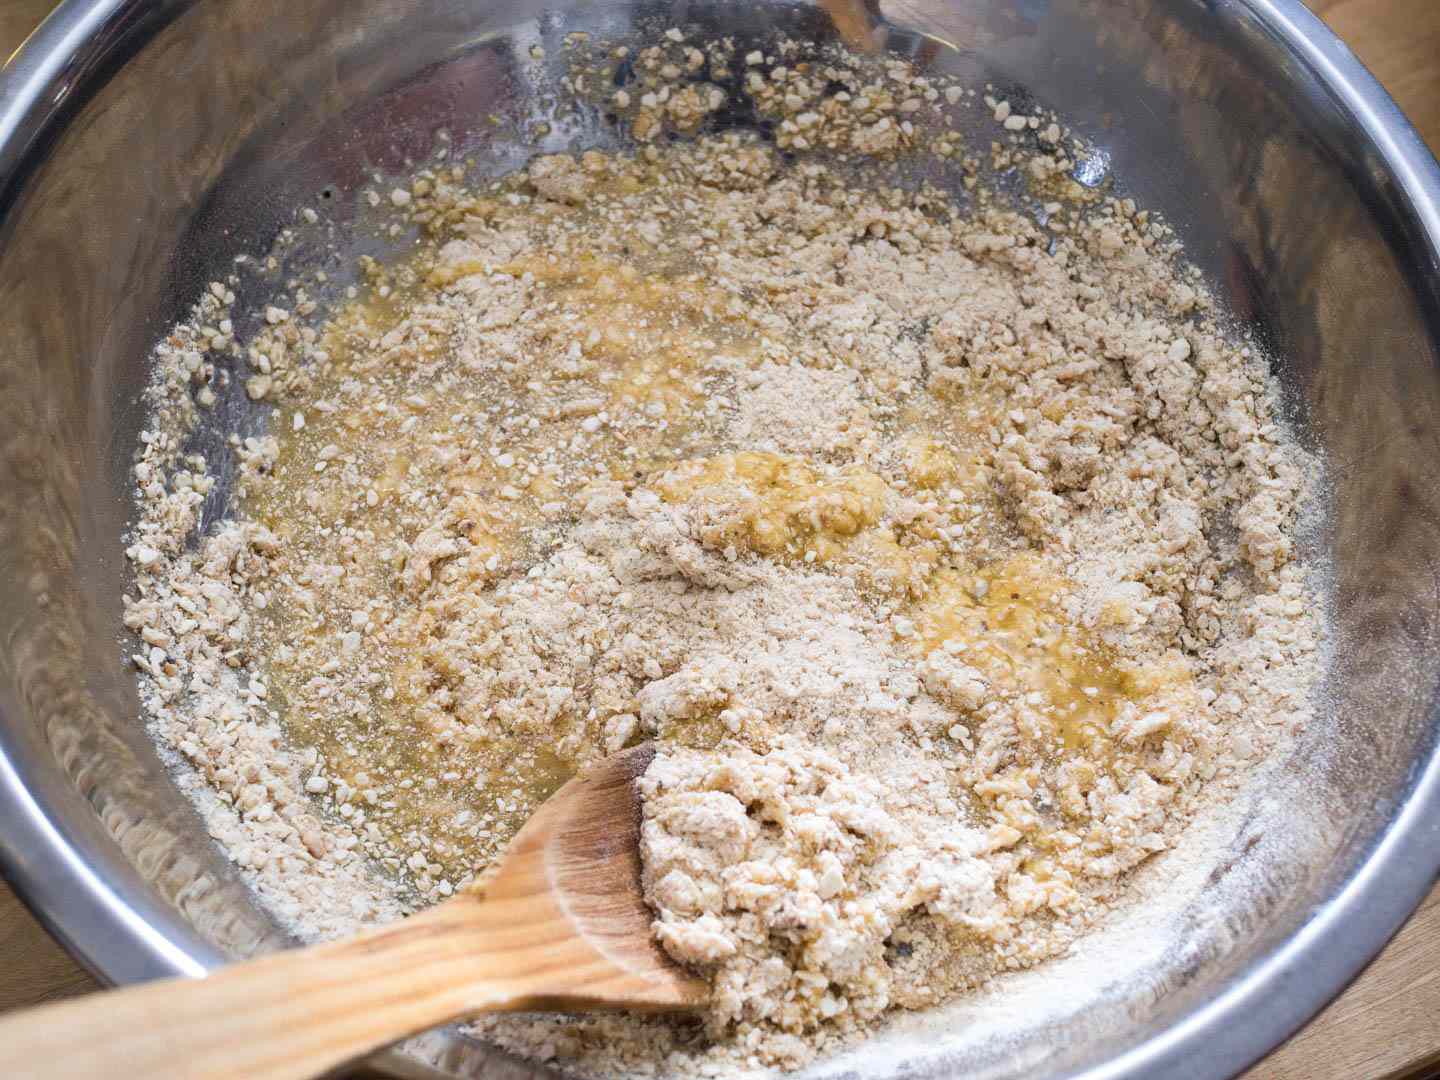 Matzo meal and the rest of the dry ingredients and the egg-seltzer-schmaltz mixture are being stirred together with a wooden spoon in a mixing bowl.